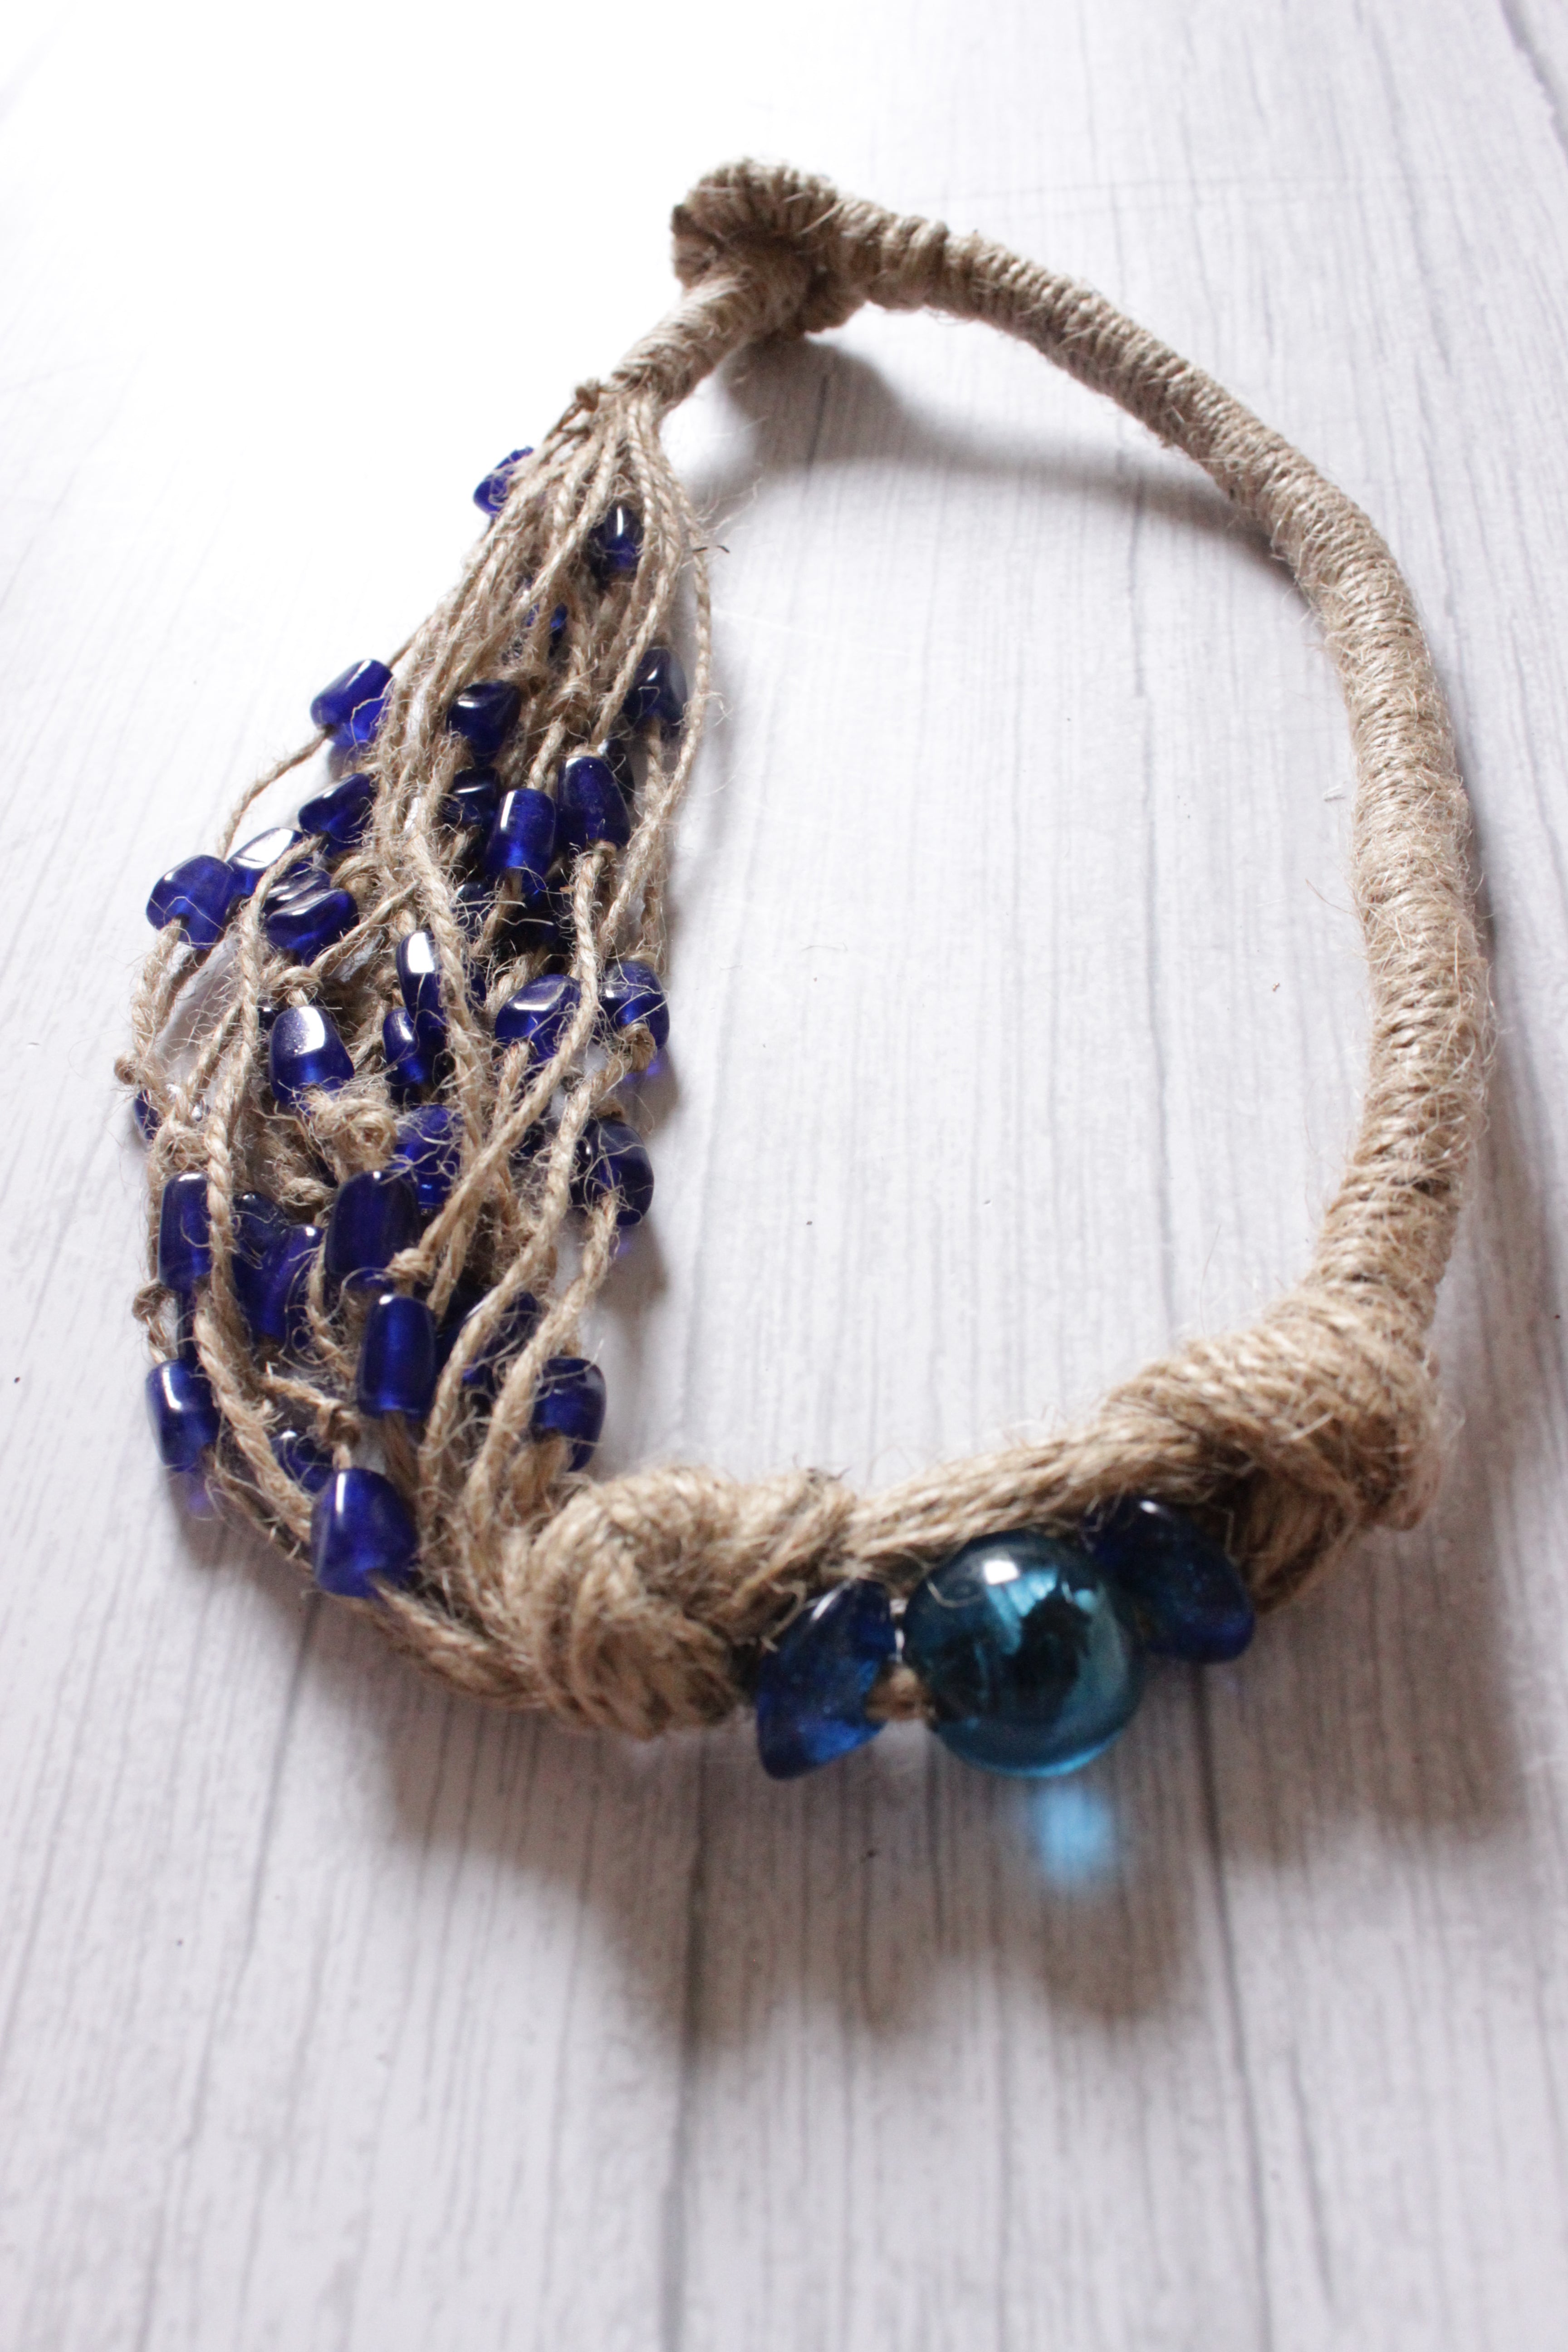 Multiple Jute Strings Embellished with Beads Choker Necklace